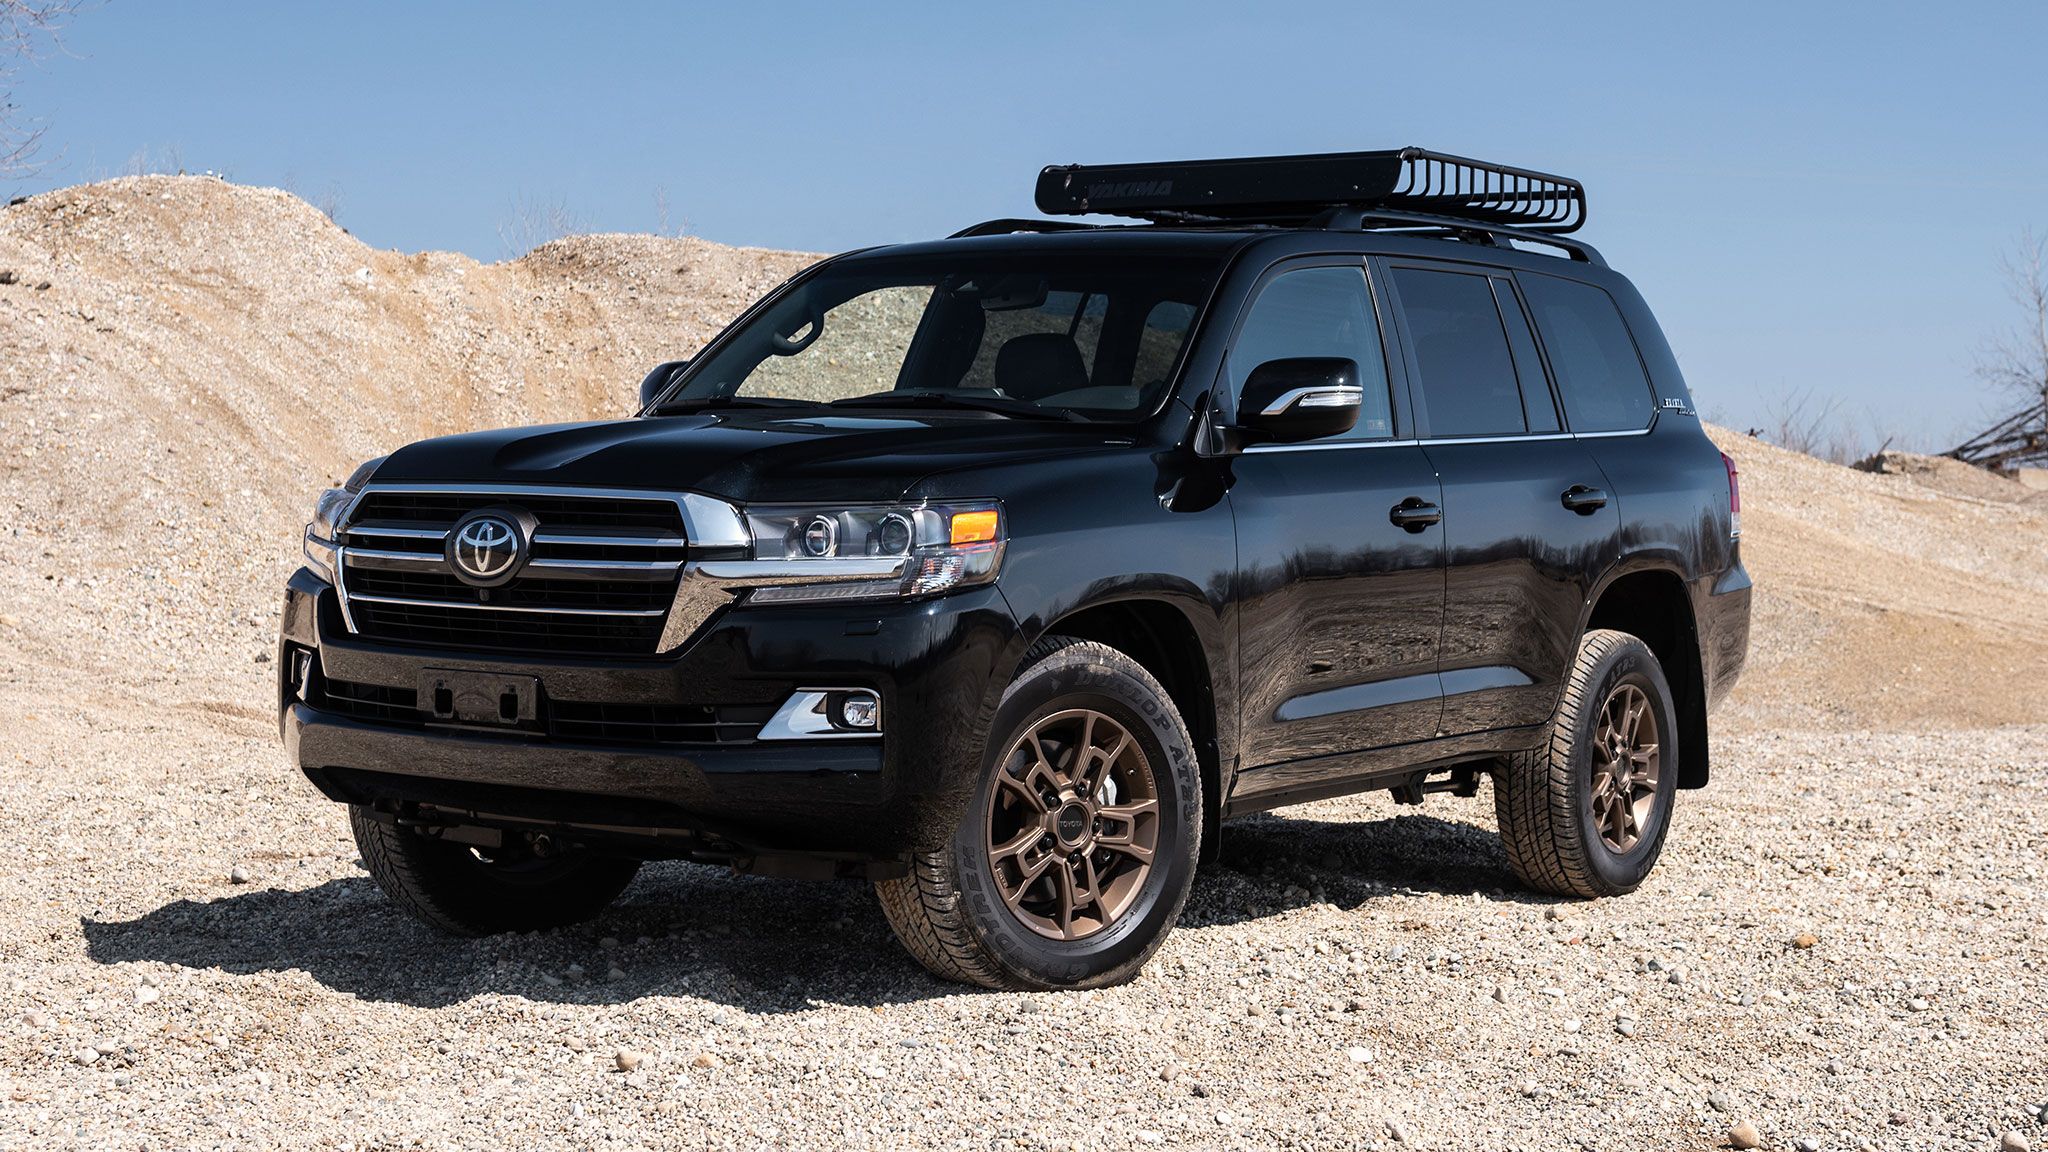 The 2021 Toyota Land Cruiser Is the Same Old SUV as Before